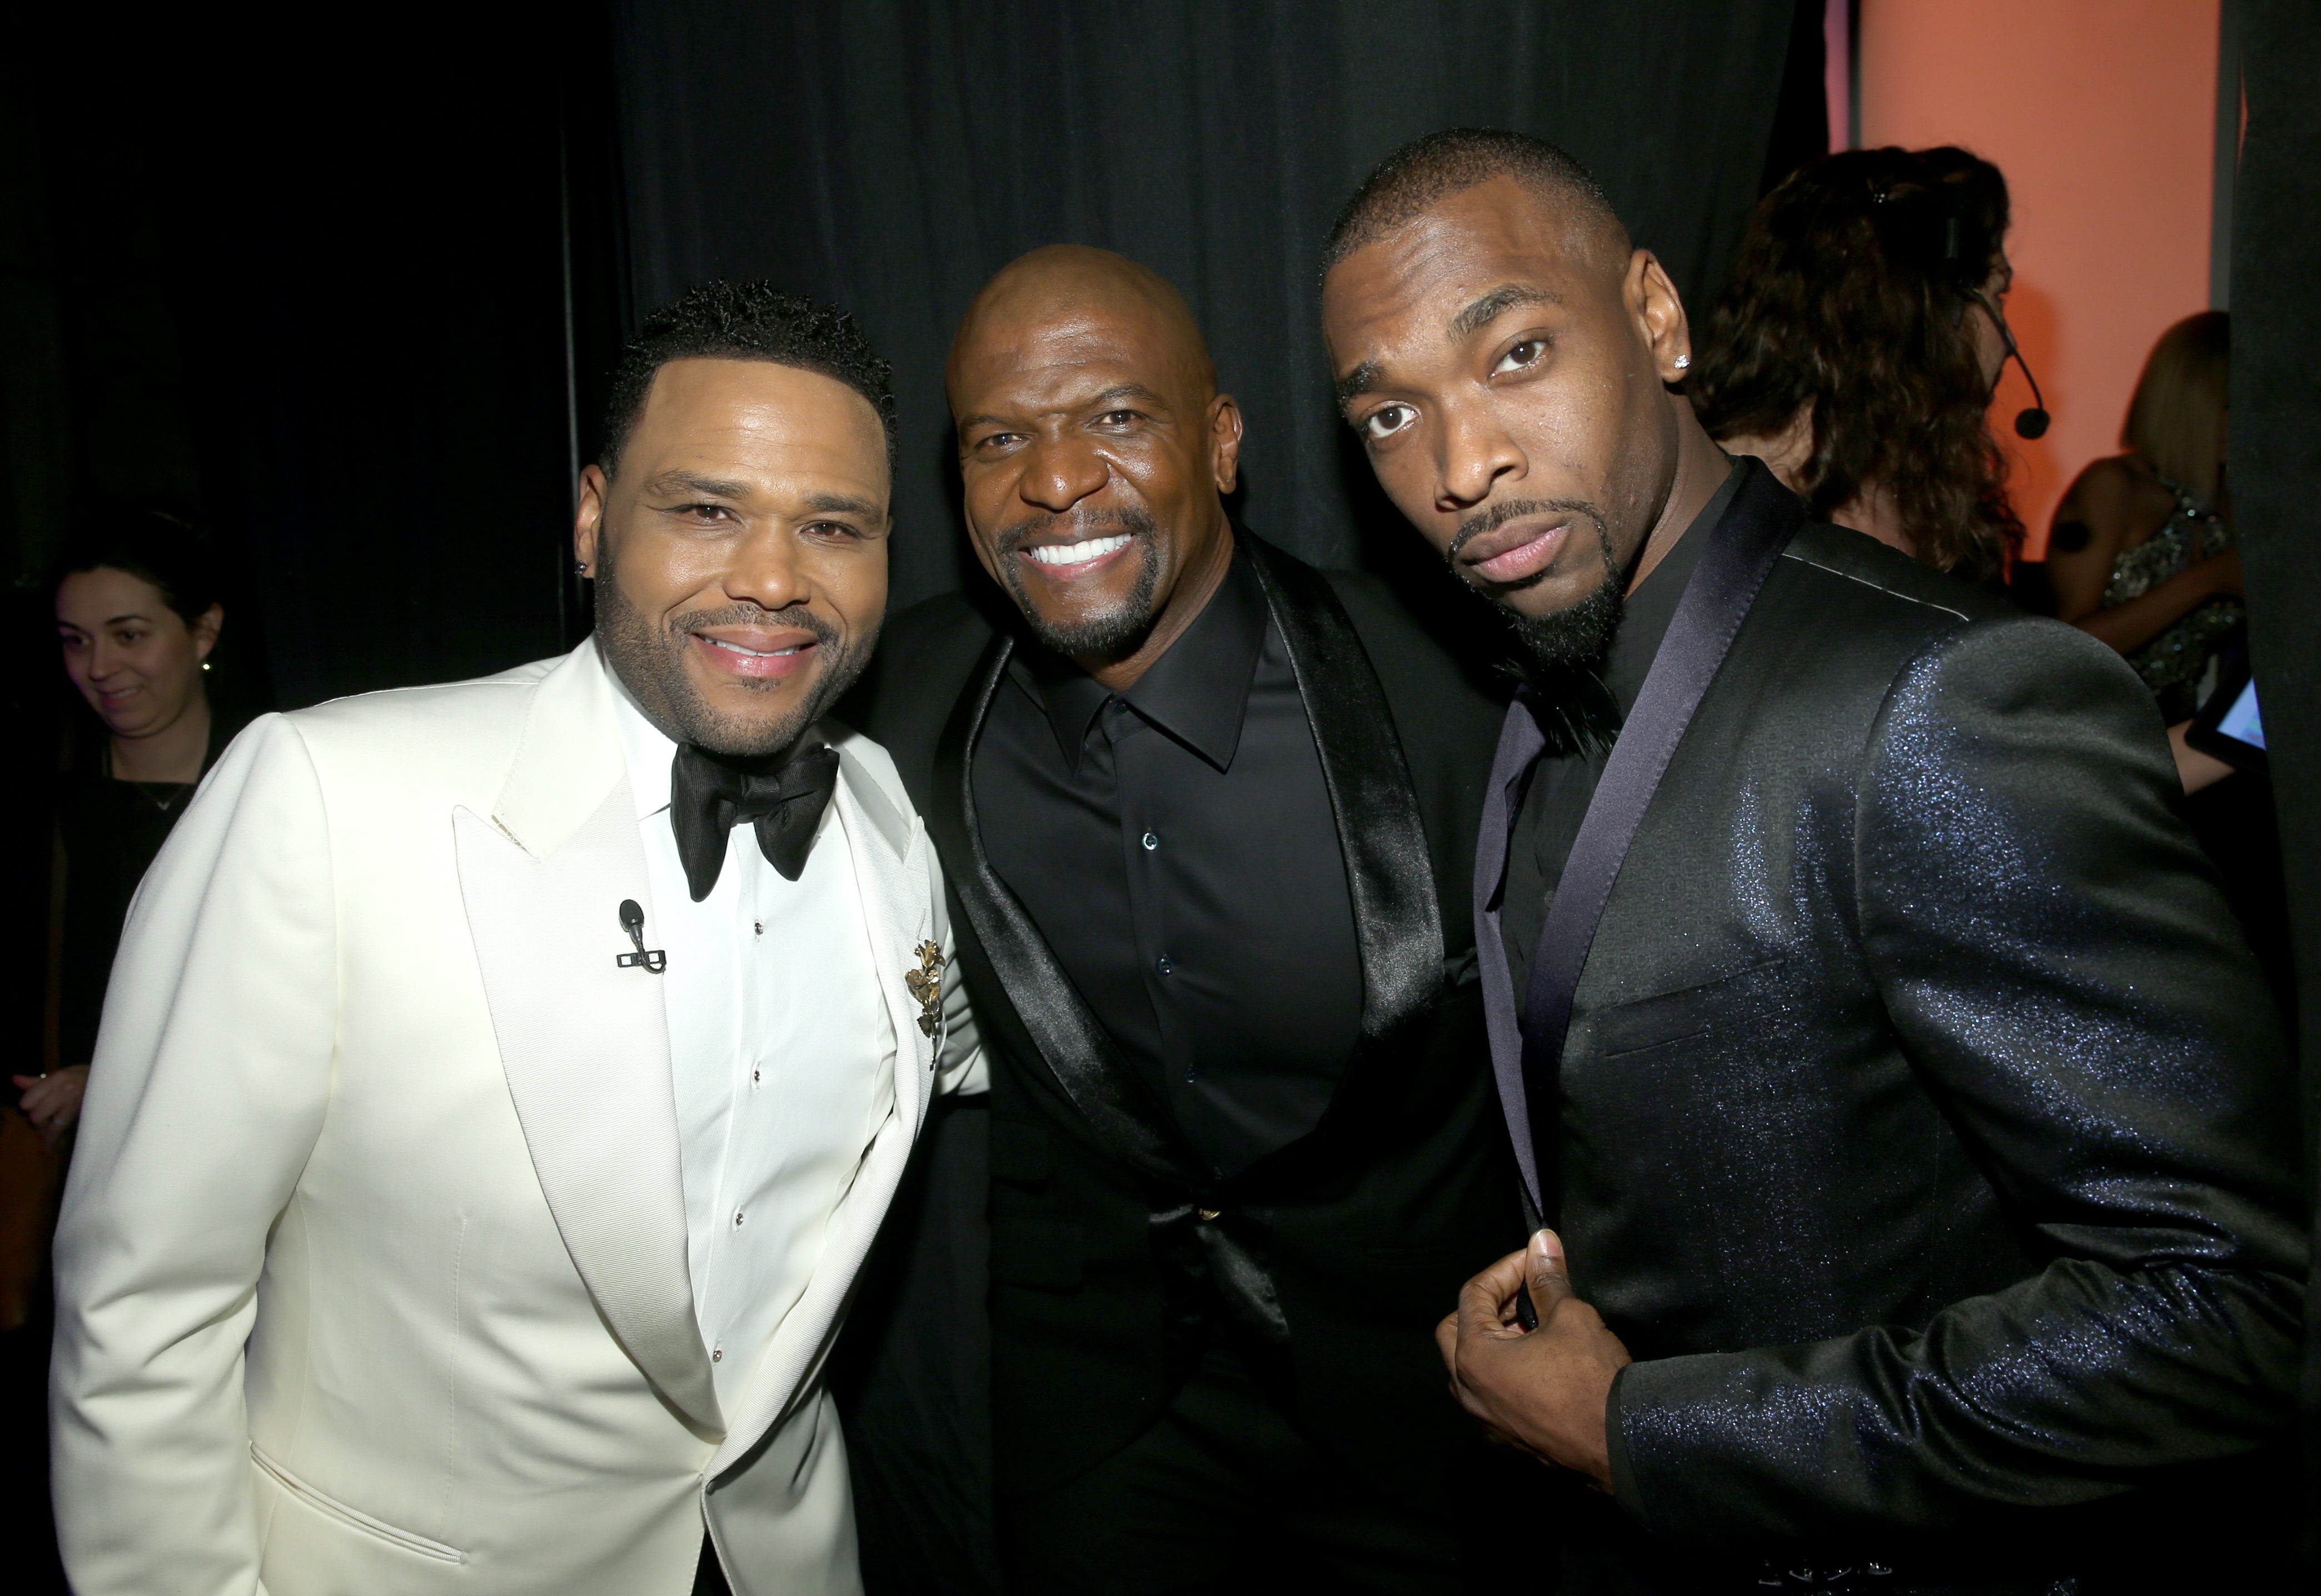 Oh, Hey Fellas! All The Fine Men At The 2018 NAACP Image Awards
